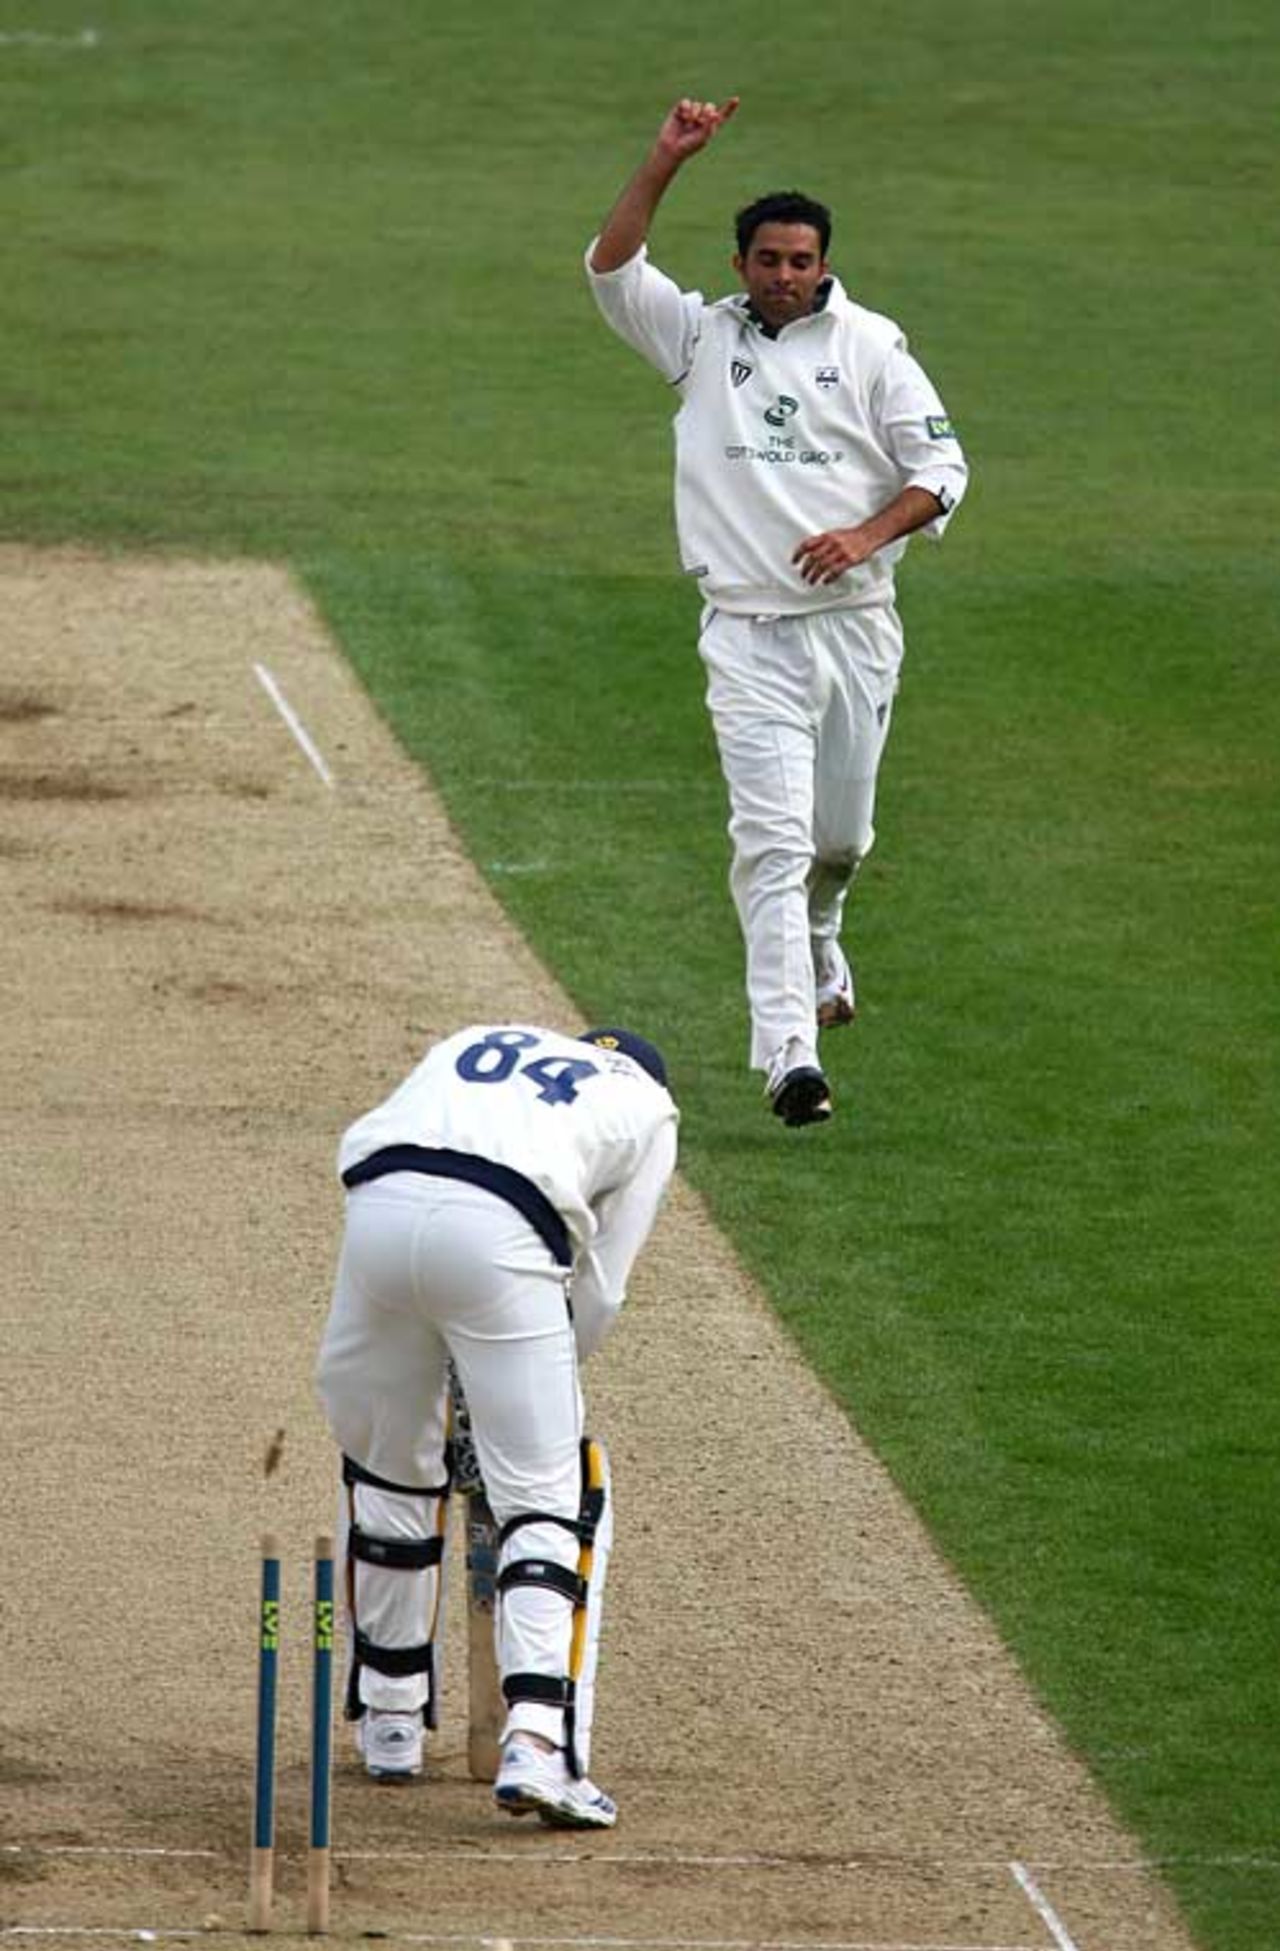 Kabir Ali ends the resistance of David Balcombe, Hampshire v Worcestershire, County Championship Division One, The Rose Bowl, April 16, 2009